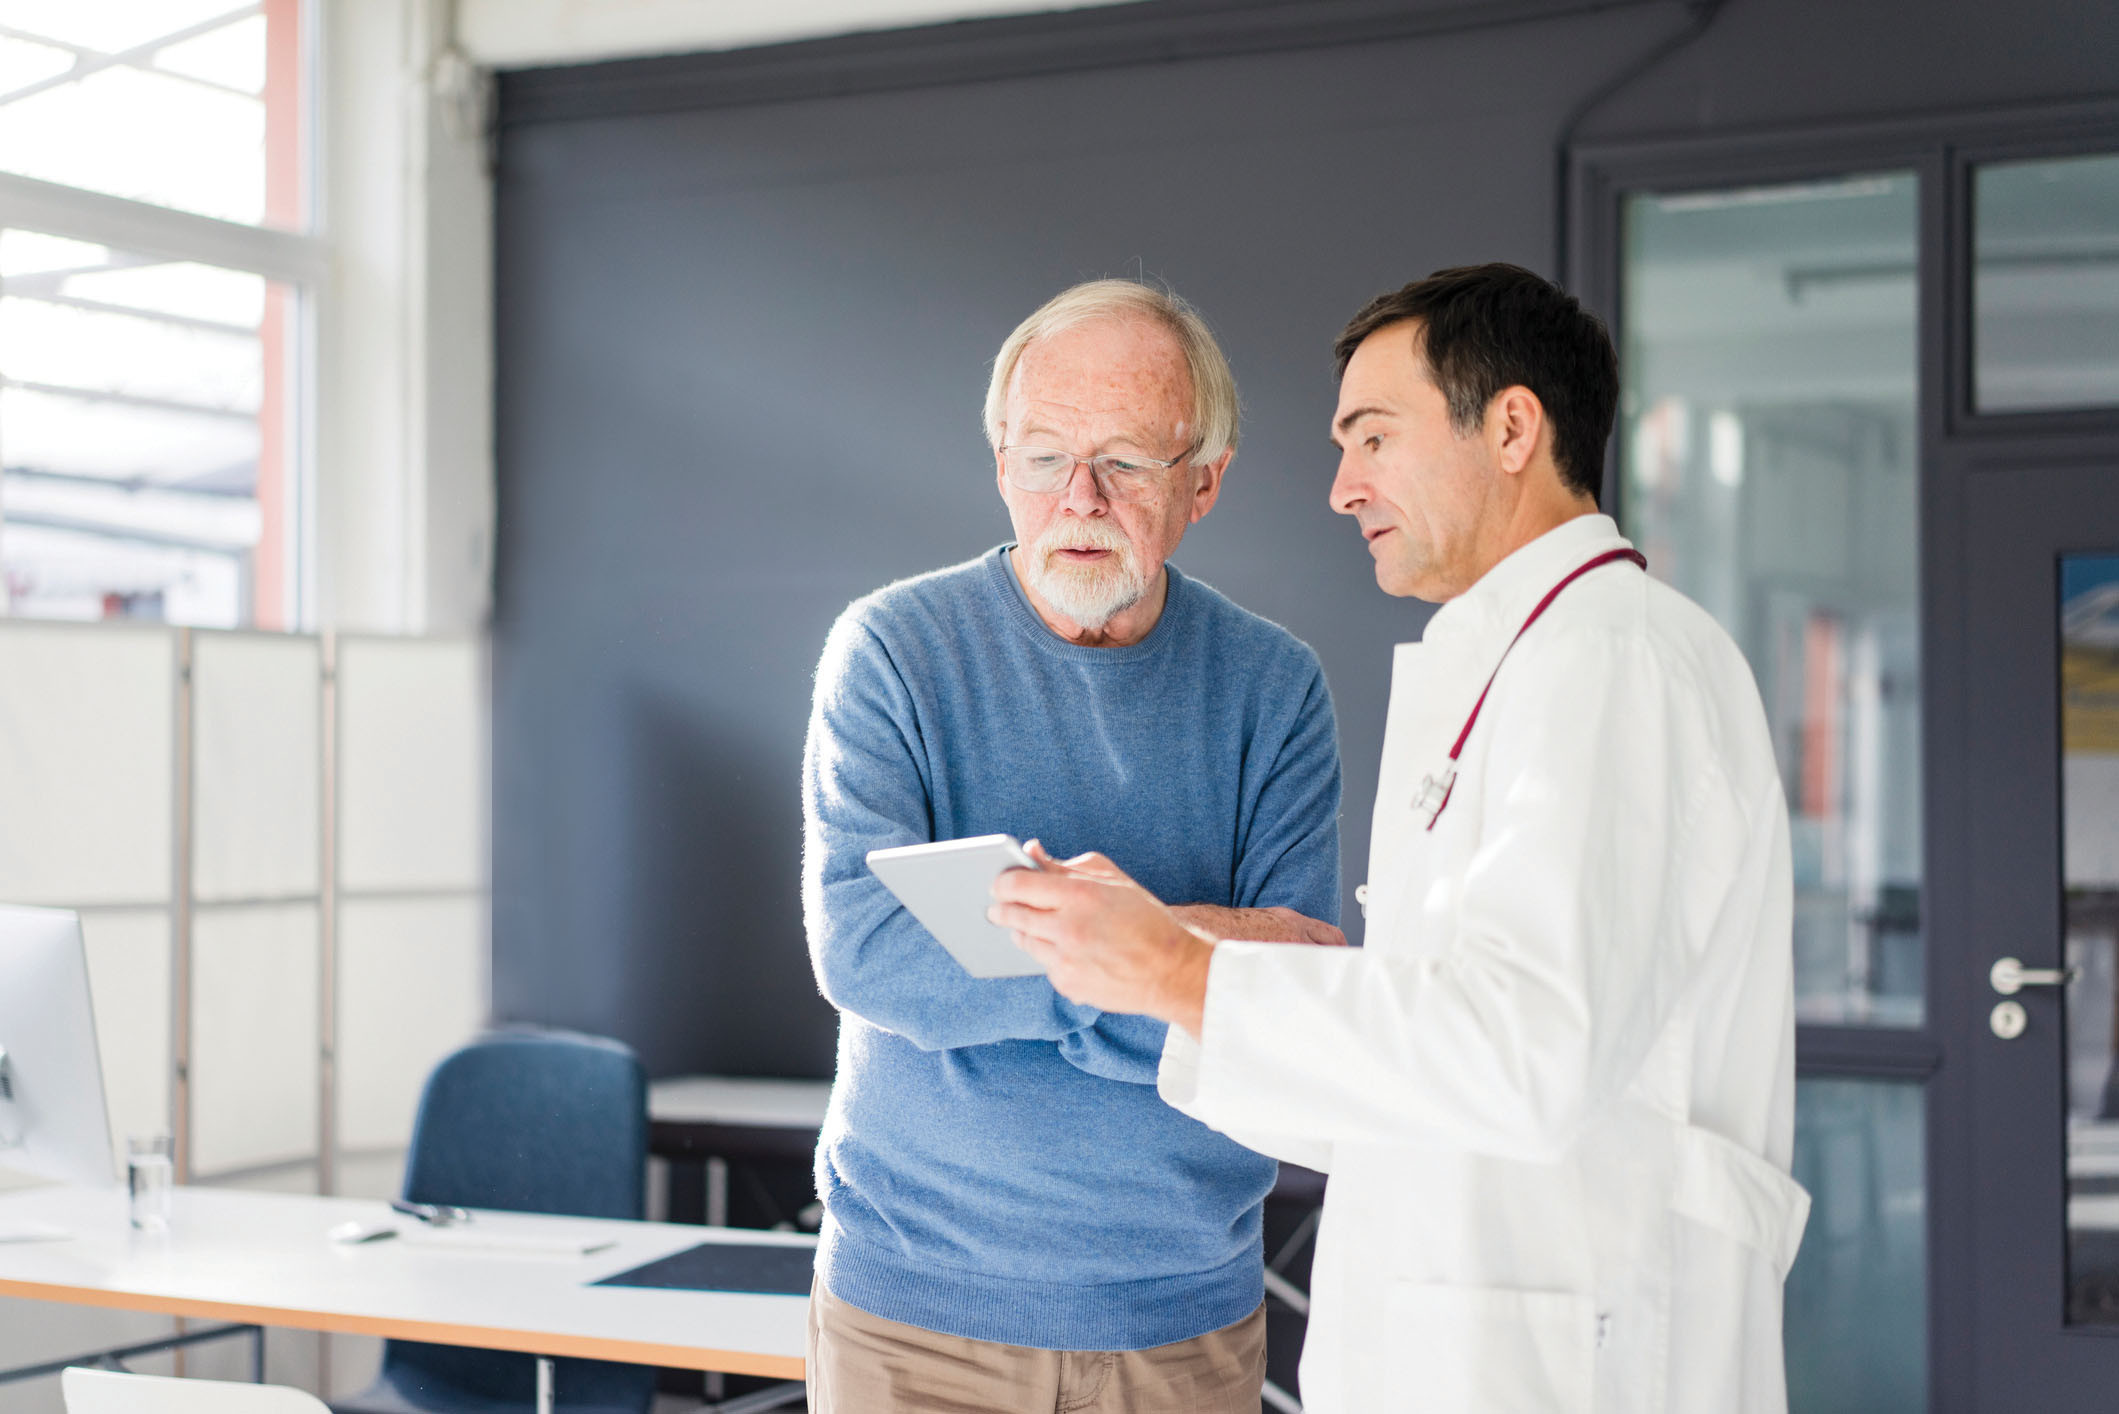 photo of a doctor and patient having a conversation while standing; the doctor is holding a tablet and showing it to the patient